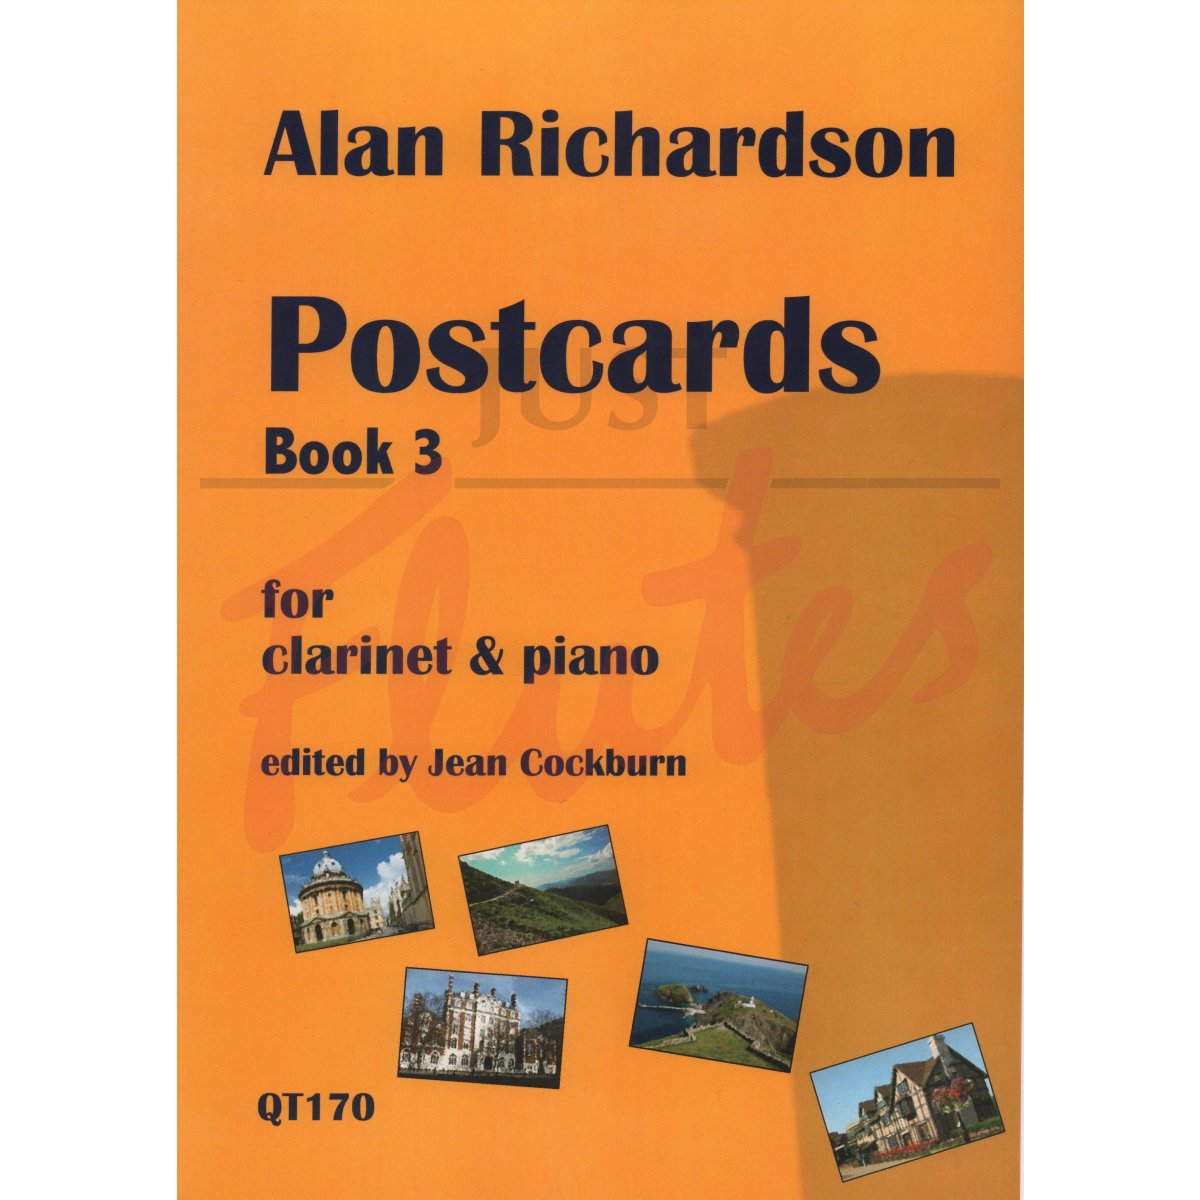 Postcards for Clarinet and Piano, Book 3